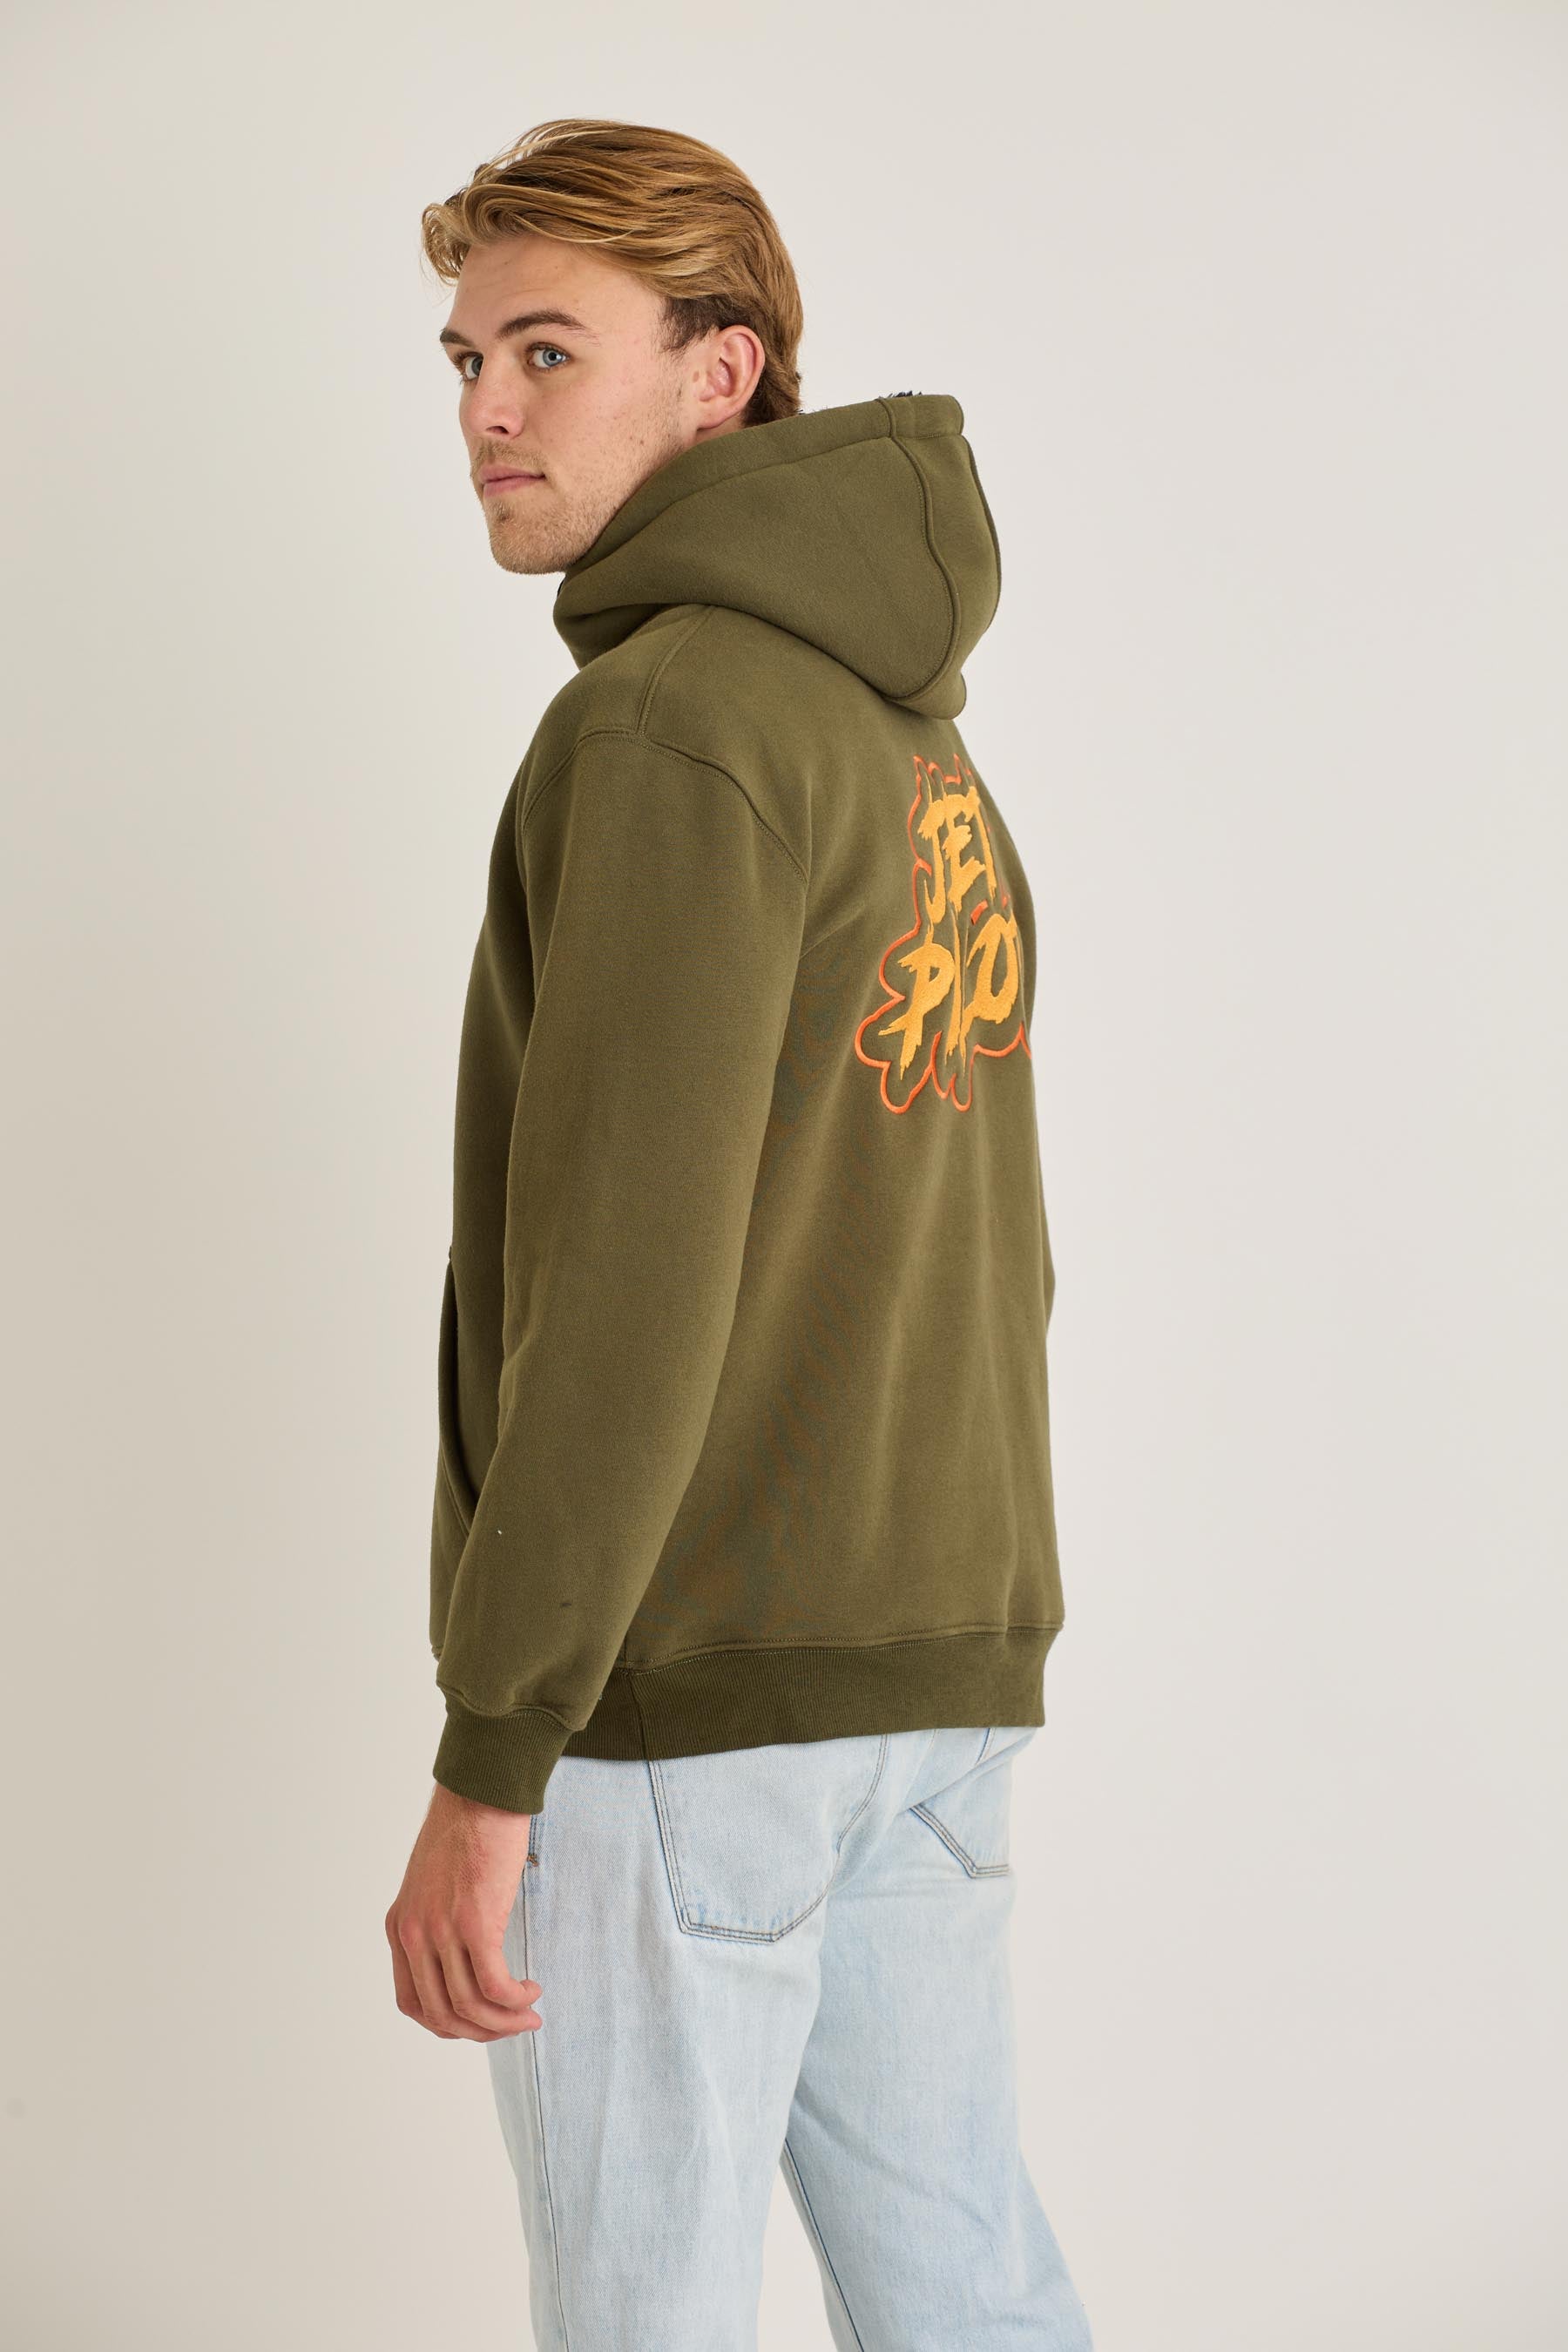 Jetpilot Yowie Sherpa Mens Pullover - Army 5